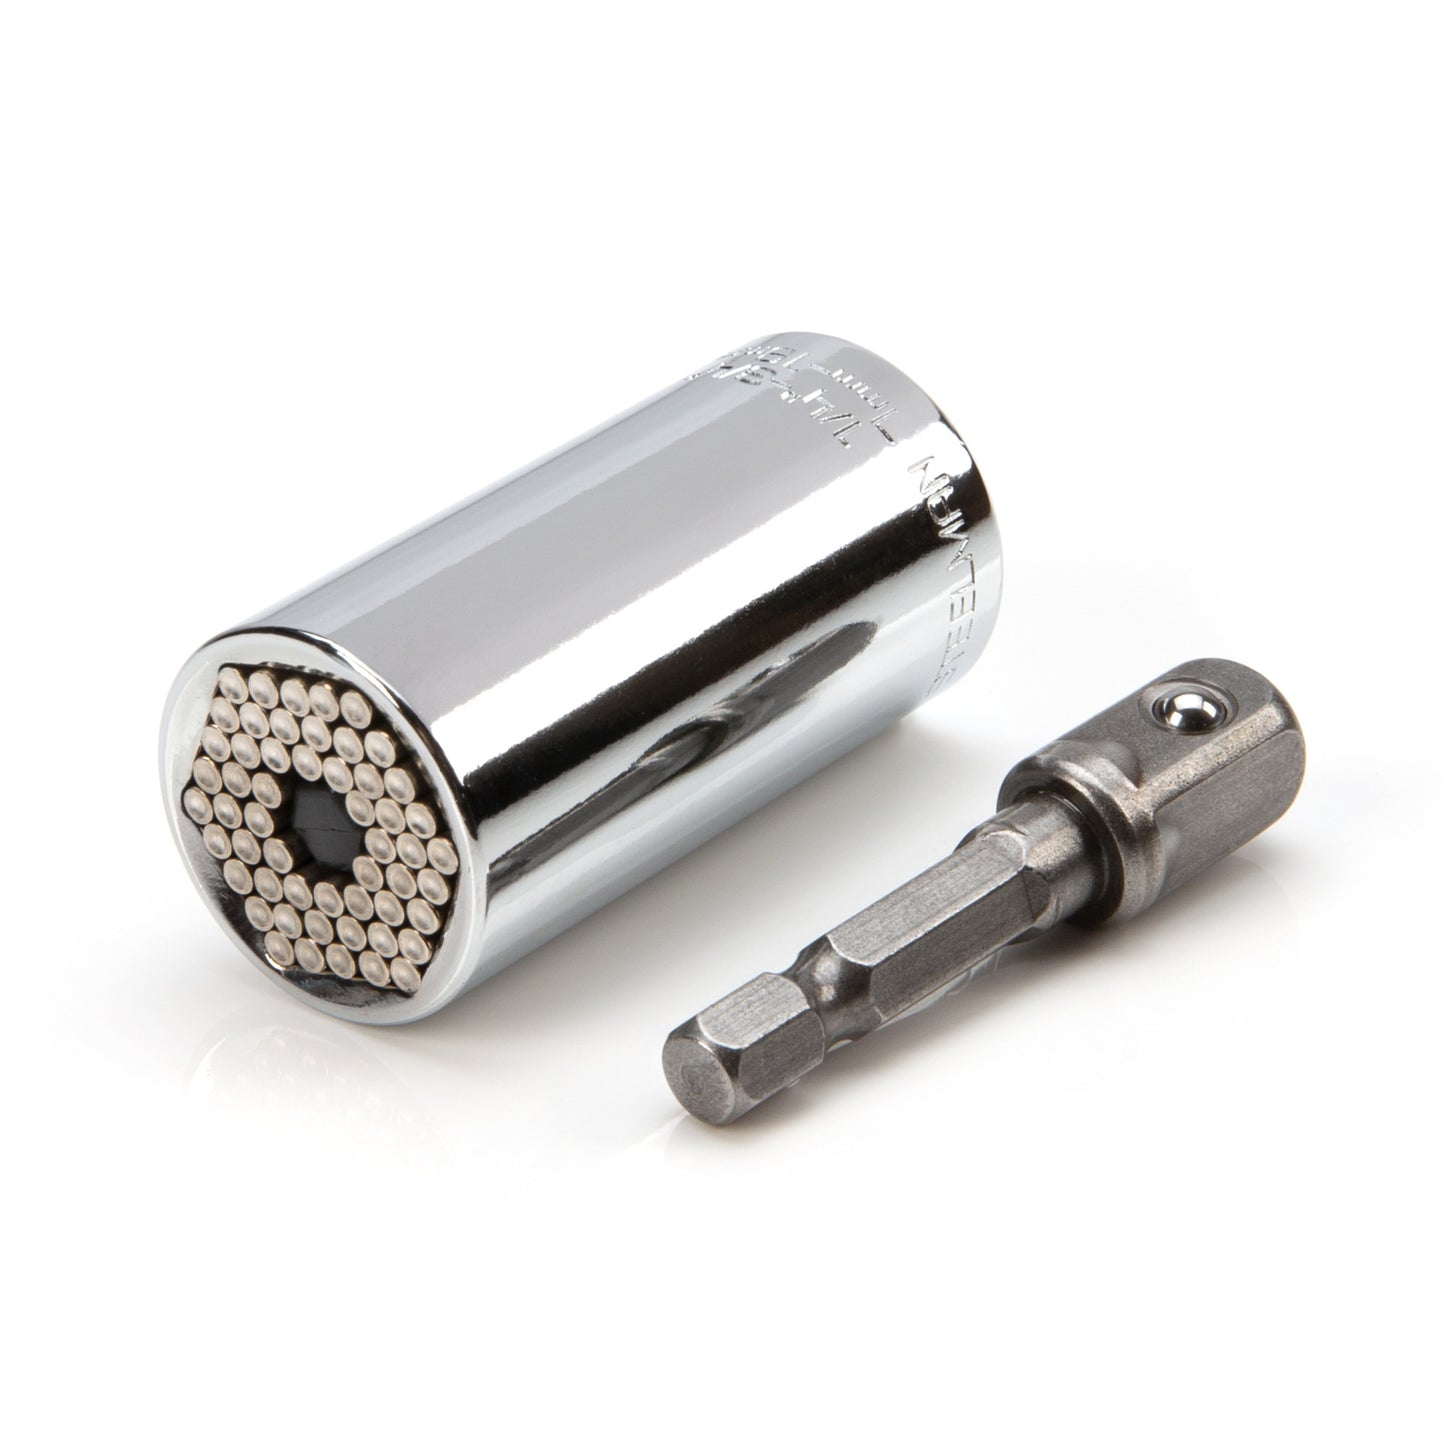 3/8-Inch Drive Universal Pin Socket with Adapter